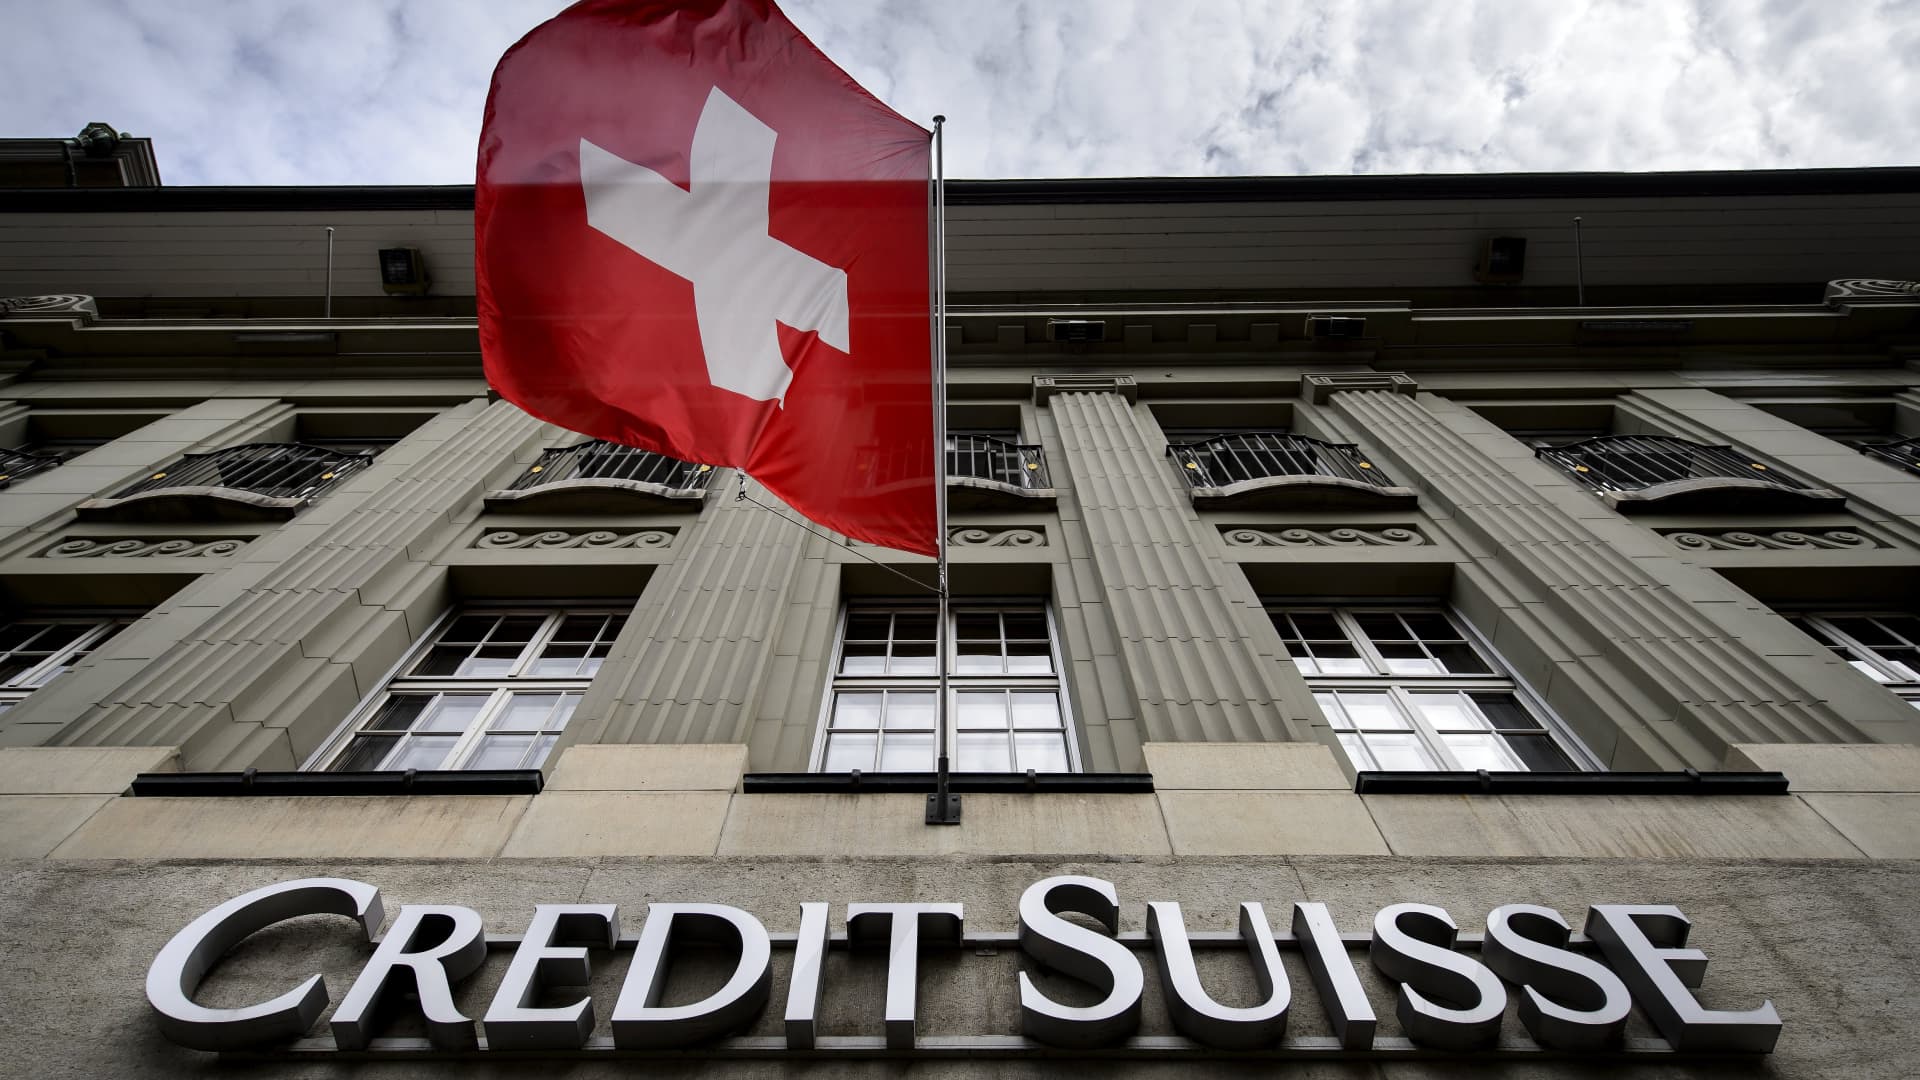 Credit Suisse is reportedly seeking to assure investors as financial concerns rise – CNBC